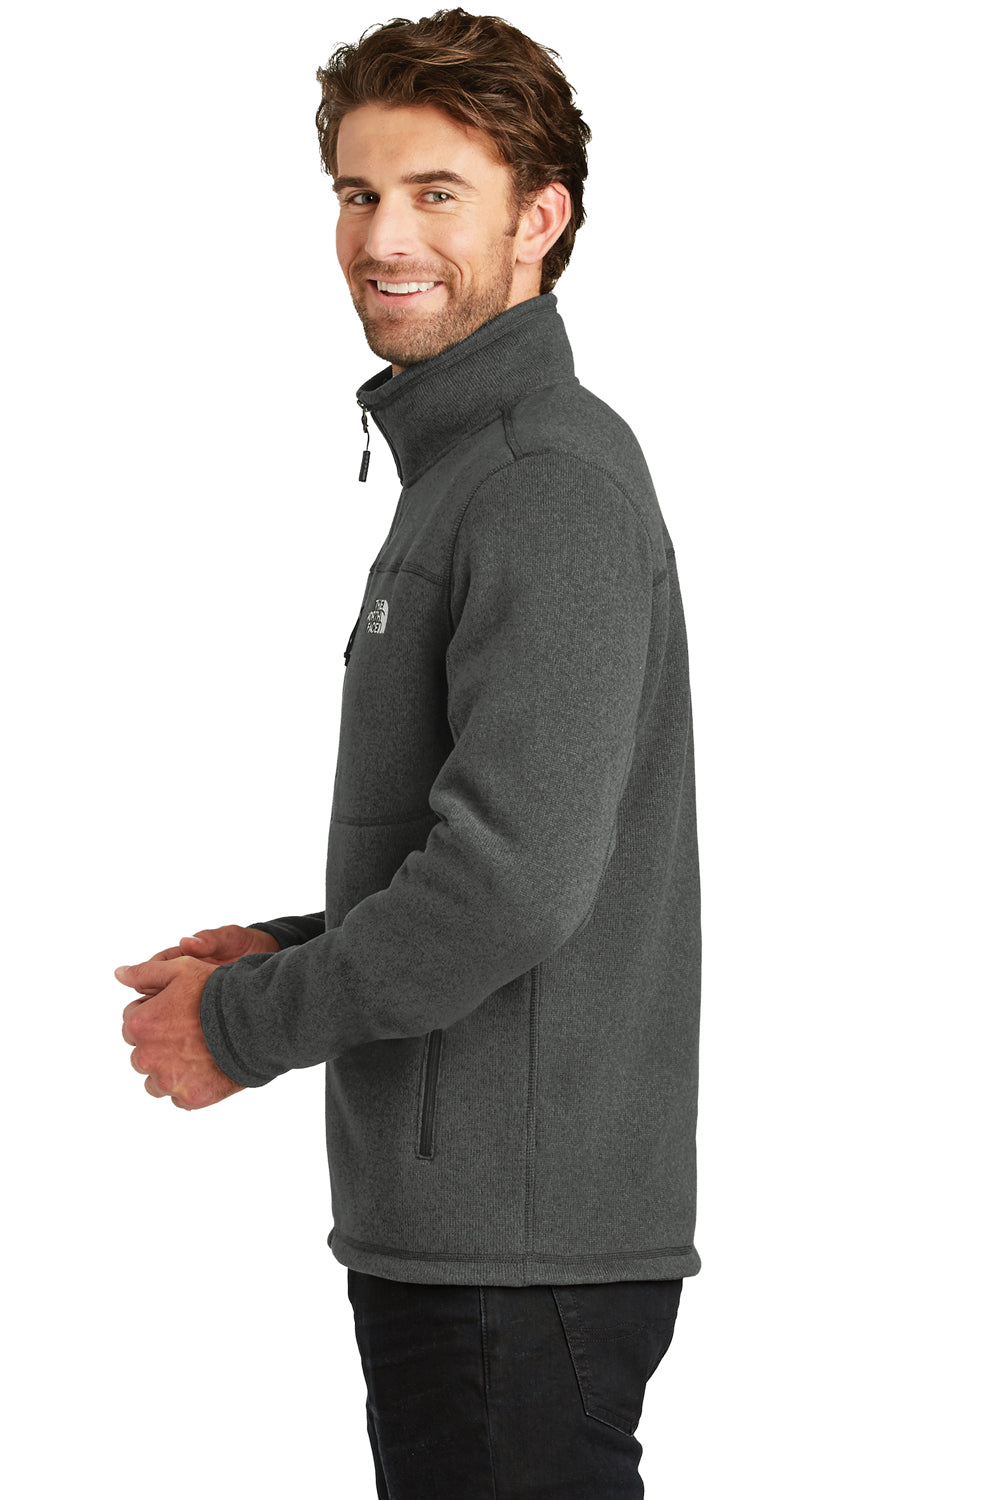 The North Face NF0A3LH7 Mens Full Zip Sweater Fleece Jacket Heather Black Side